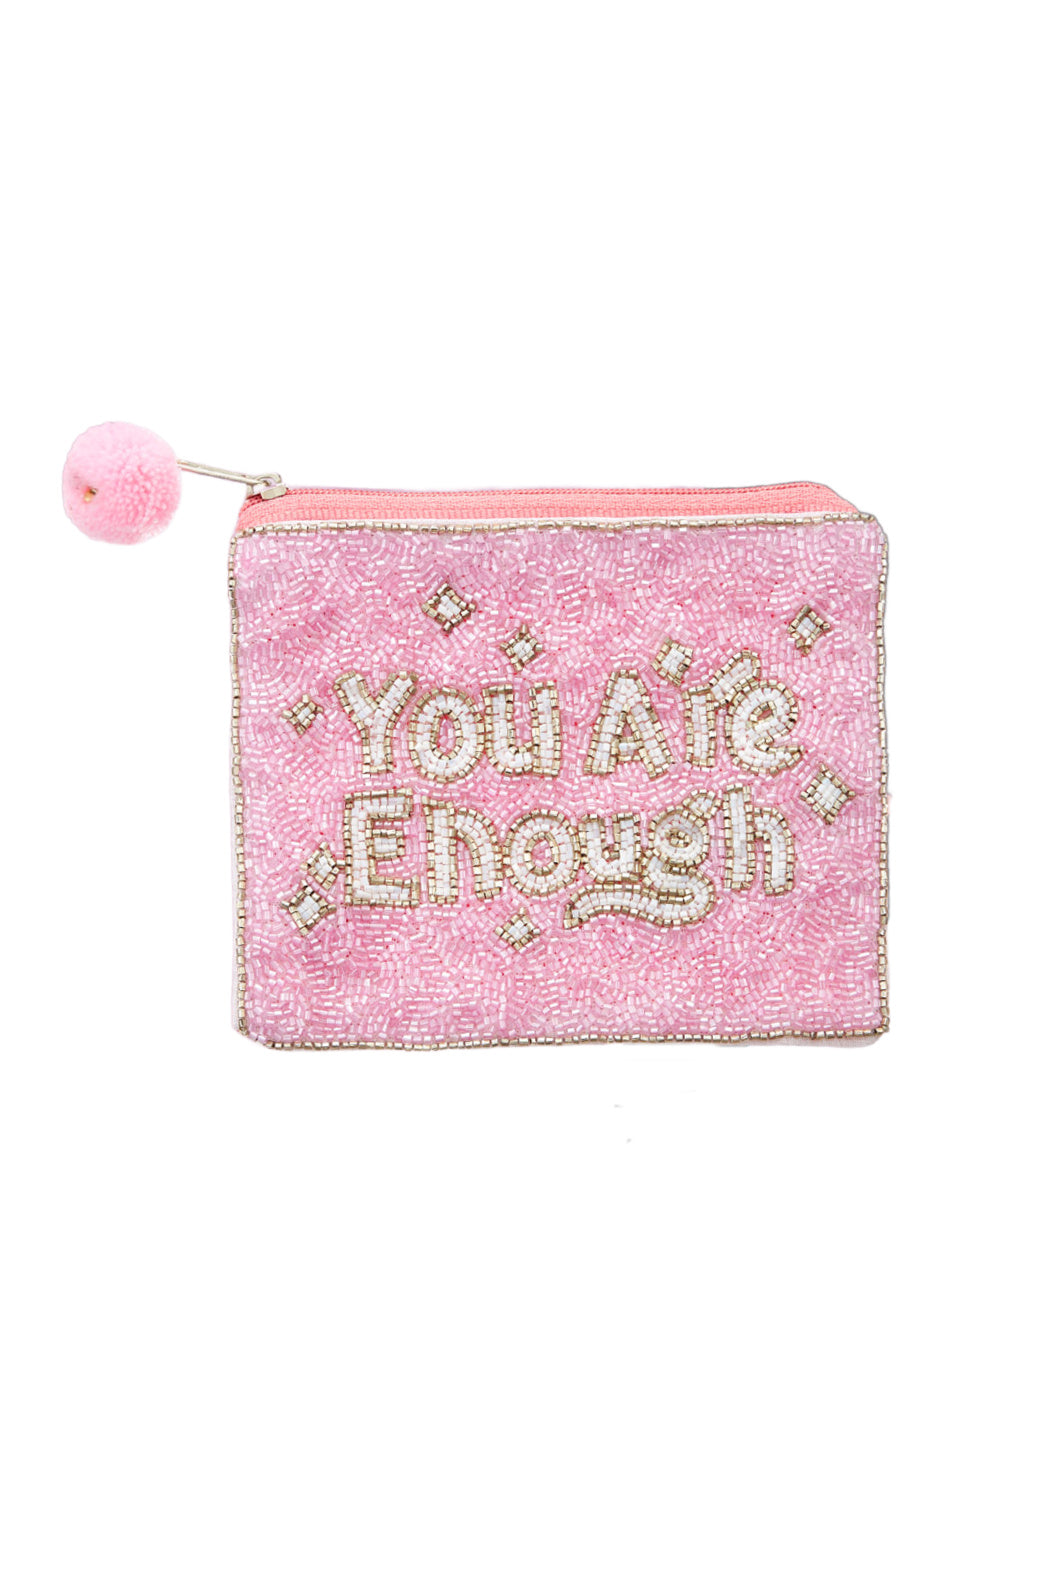 You Are Enough Beaded Bag